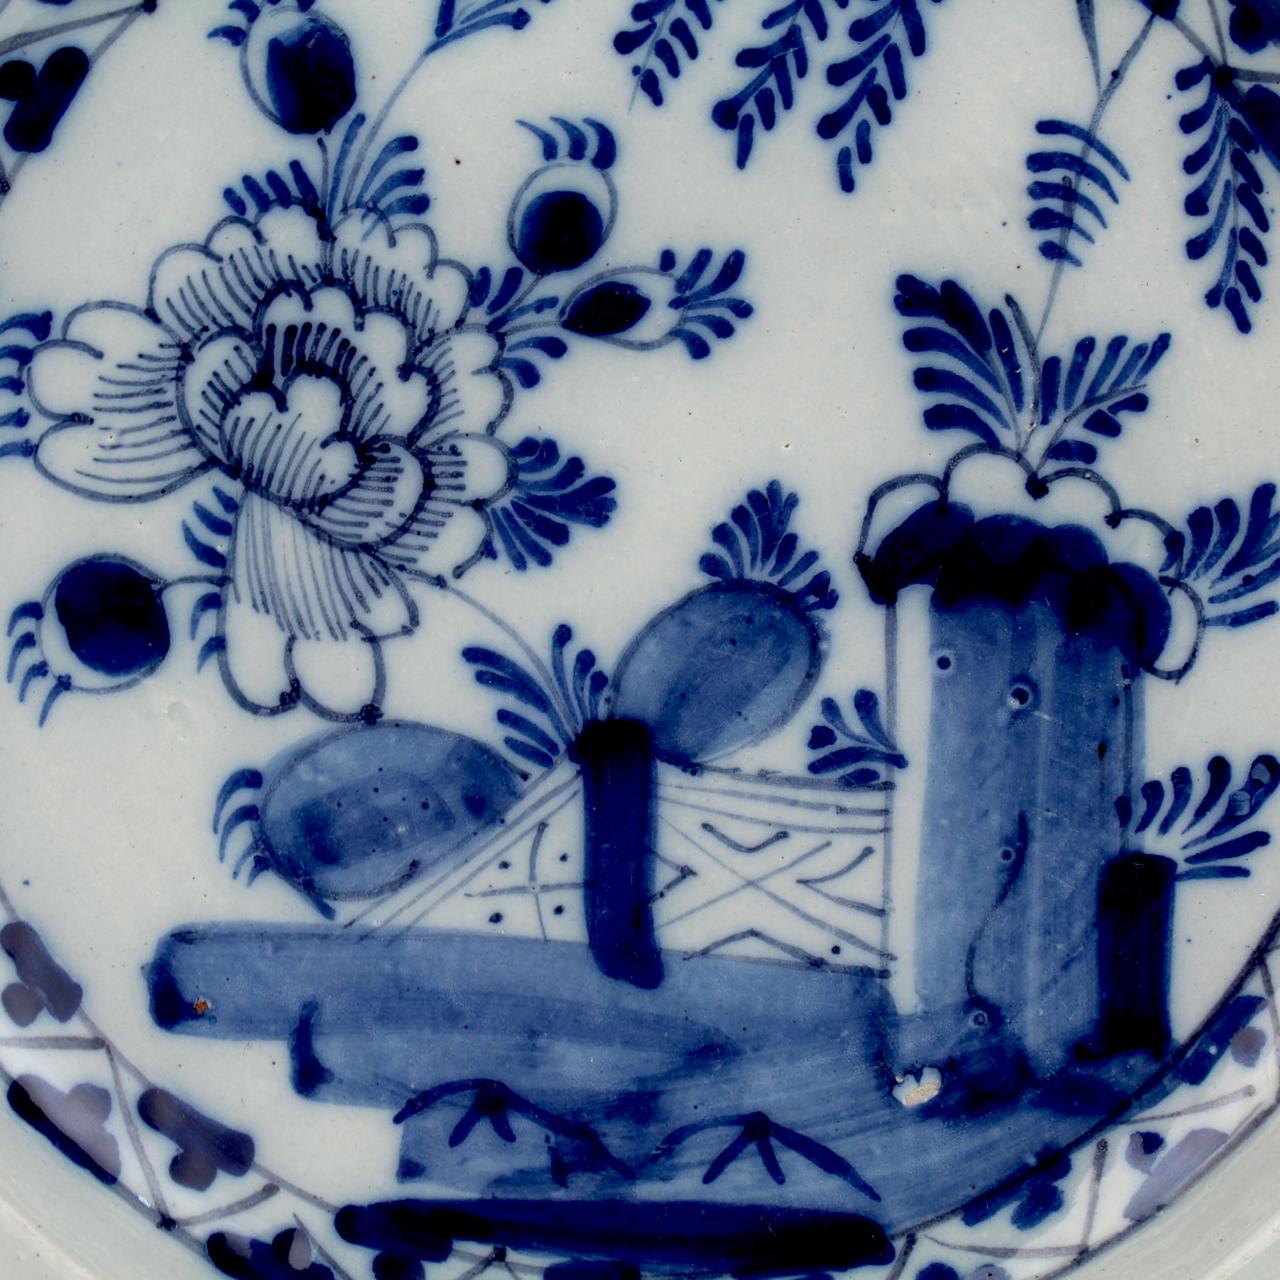 Matched Pair of Antique Dutch Delft Pottery Chinoiserie Chargers or Wall Plates 4